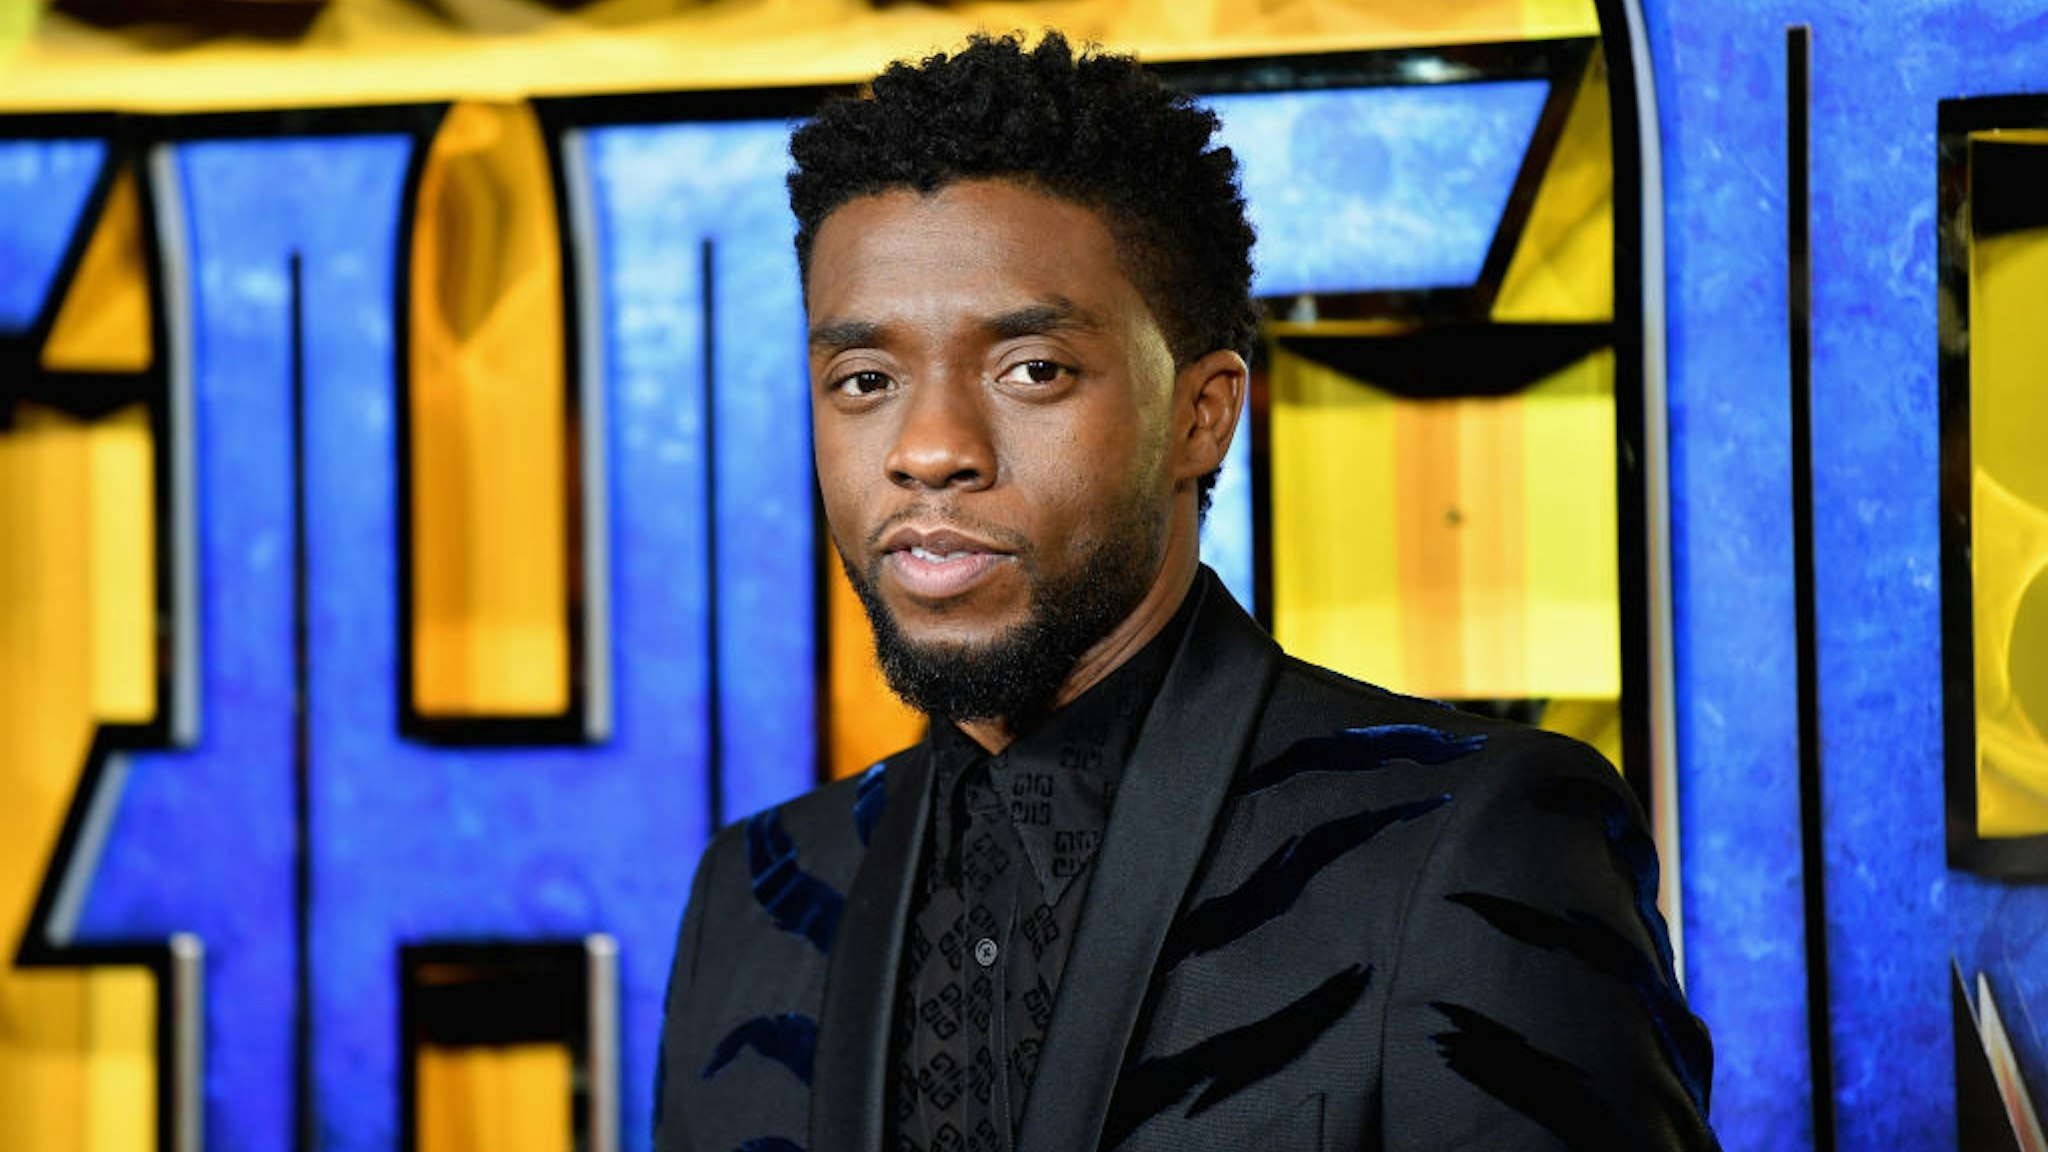 ONDON, ENGLAND - FEBRUARY 08: Chadwick Boseman attends the European Premiere of Marvel Studios' "Black Panther" at the Eventim Apollo, Hammersmith on February 8, 2018 in London, England. (Photo by Gareth Cattermole/Getty Images for Disney)